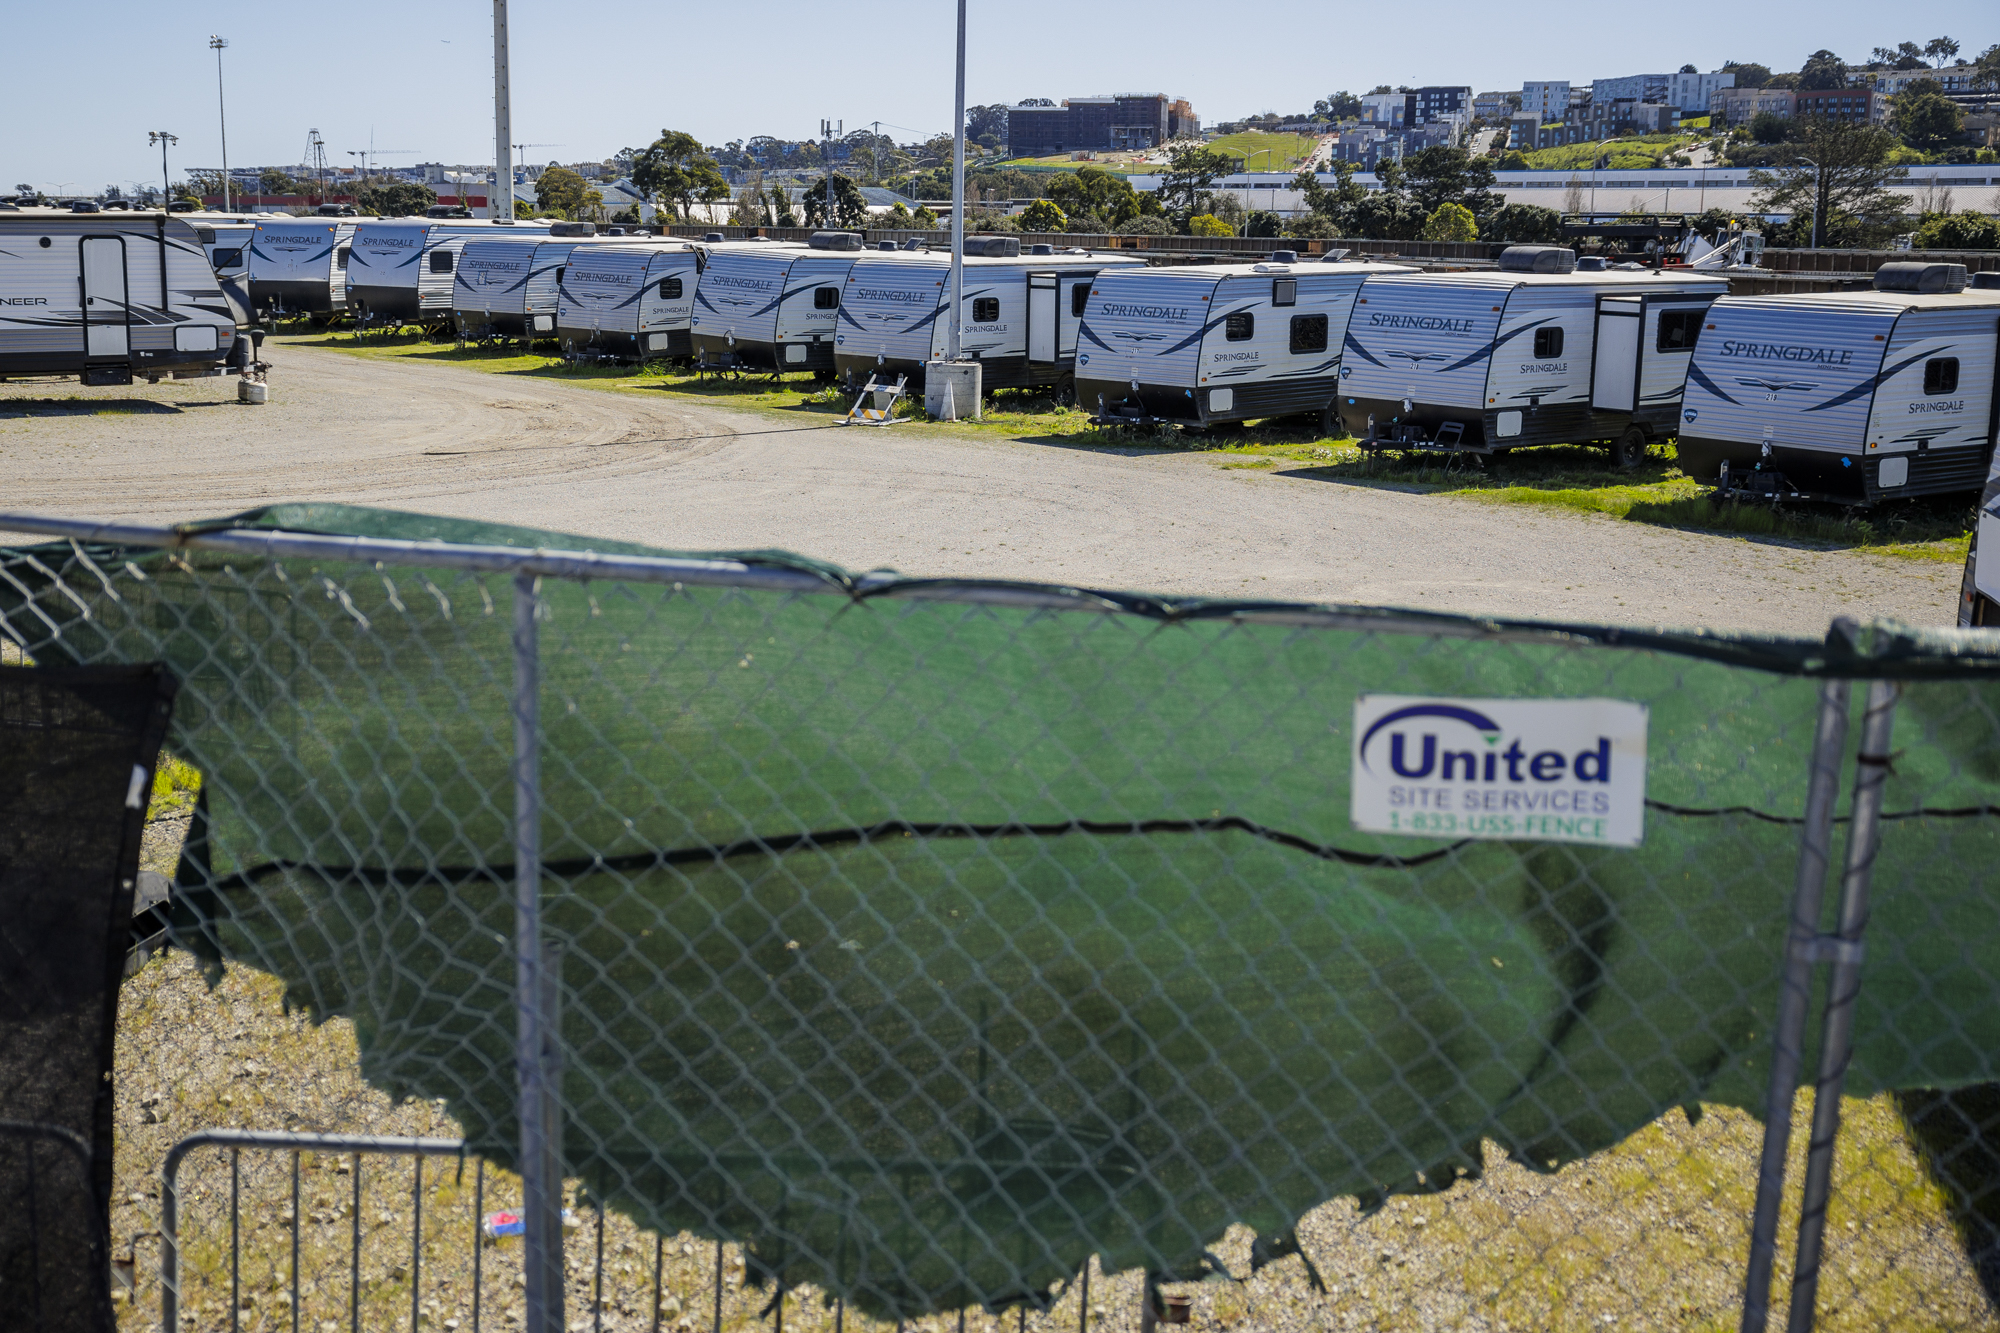 A line of trailers sits inside a park with wire fencing in the foreground.